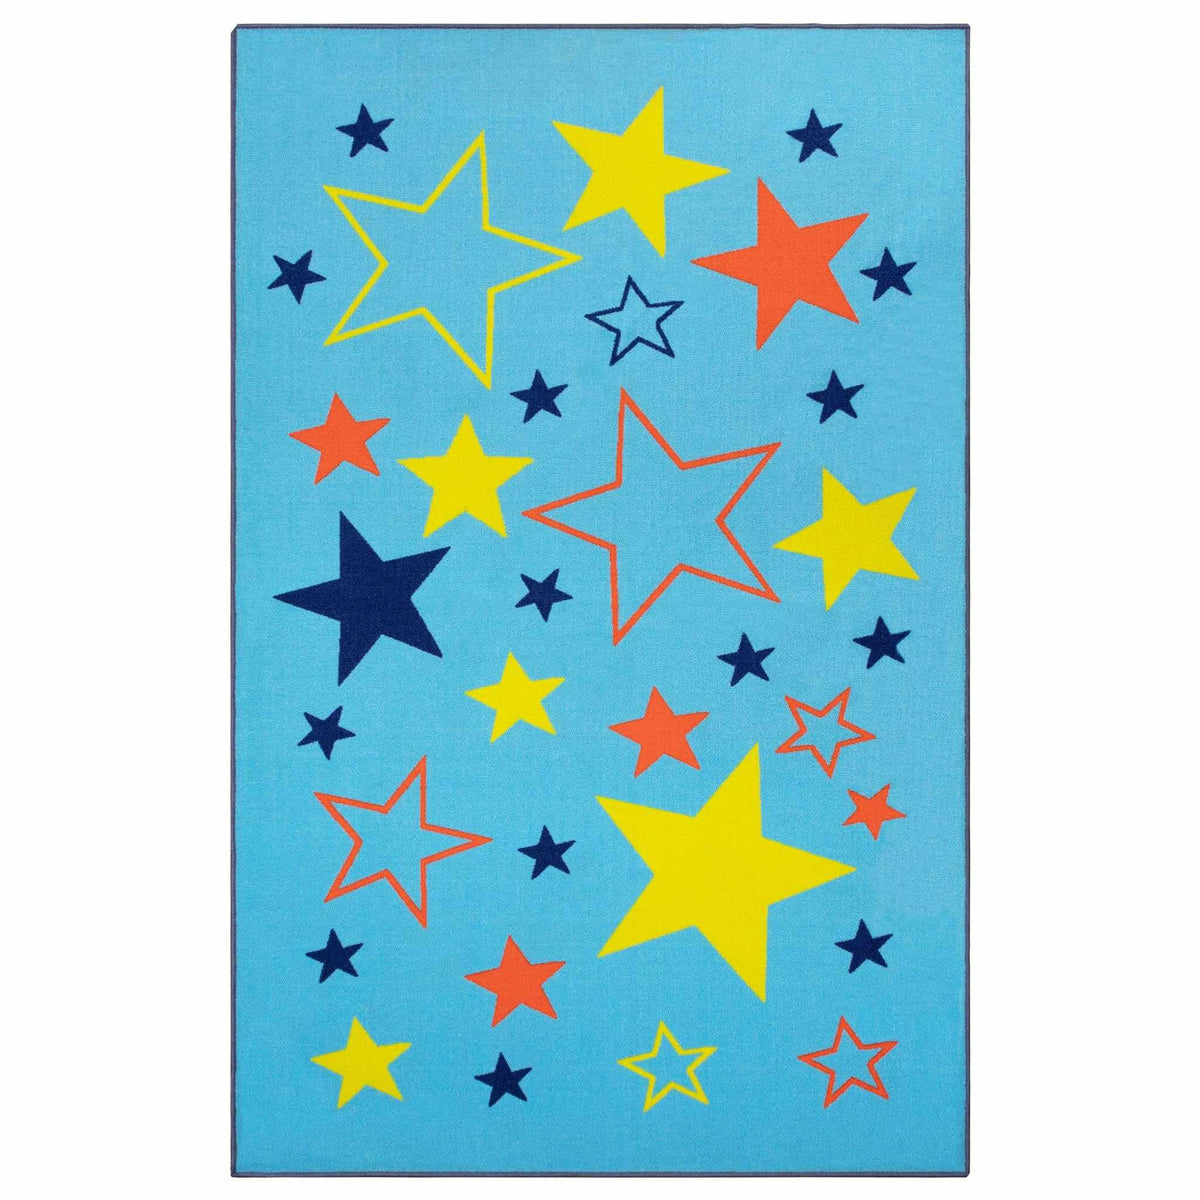  All-Star Non-Slip Kids Indoor Washable Area Rug